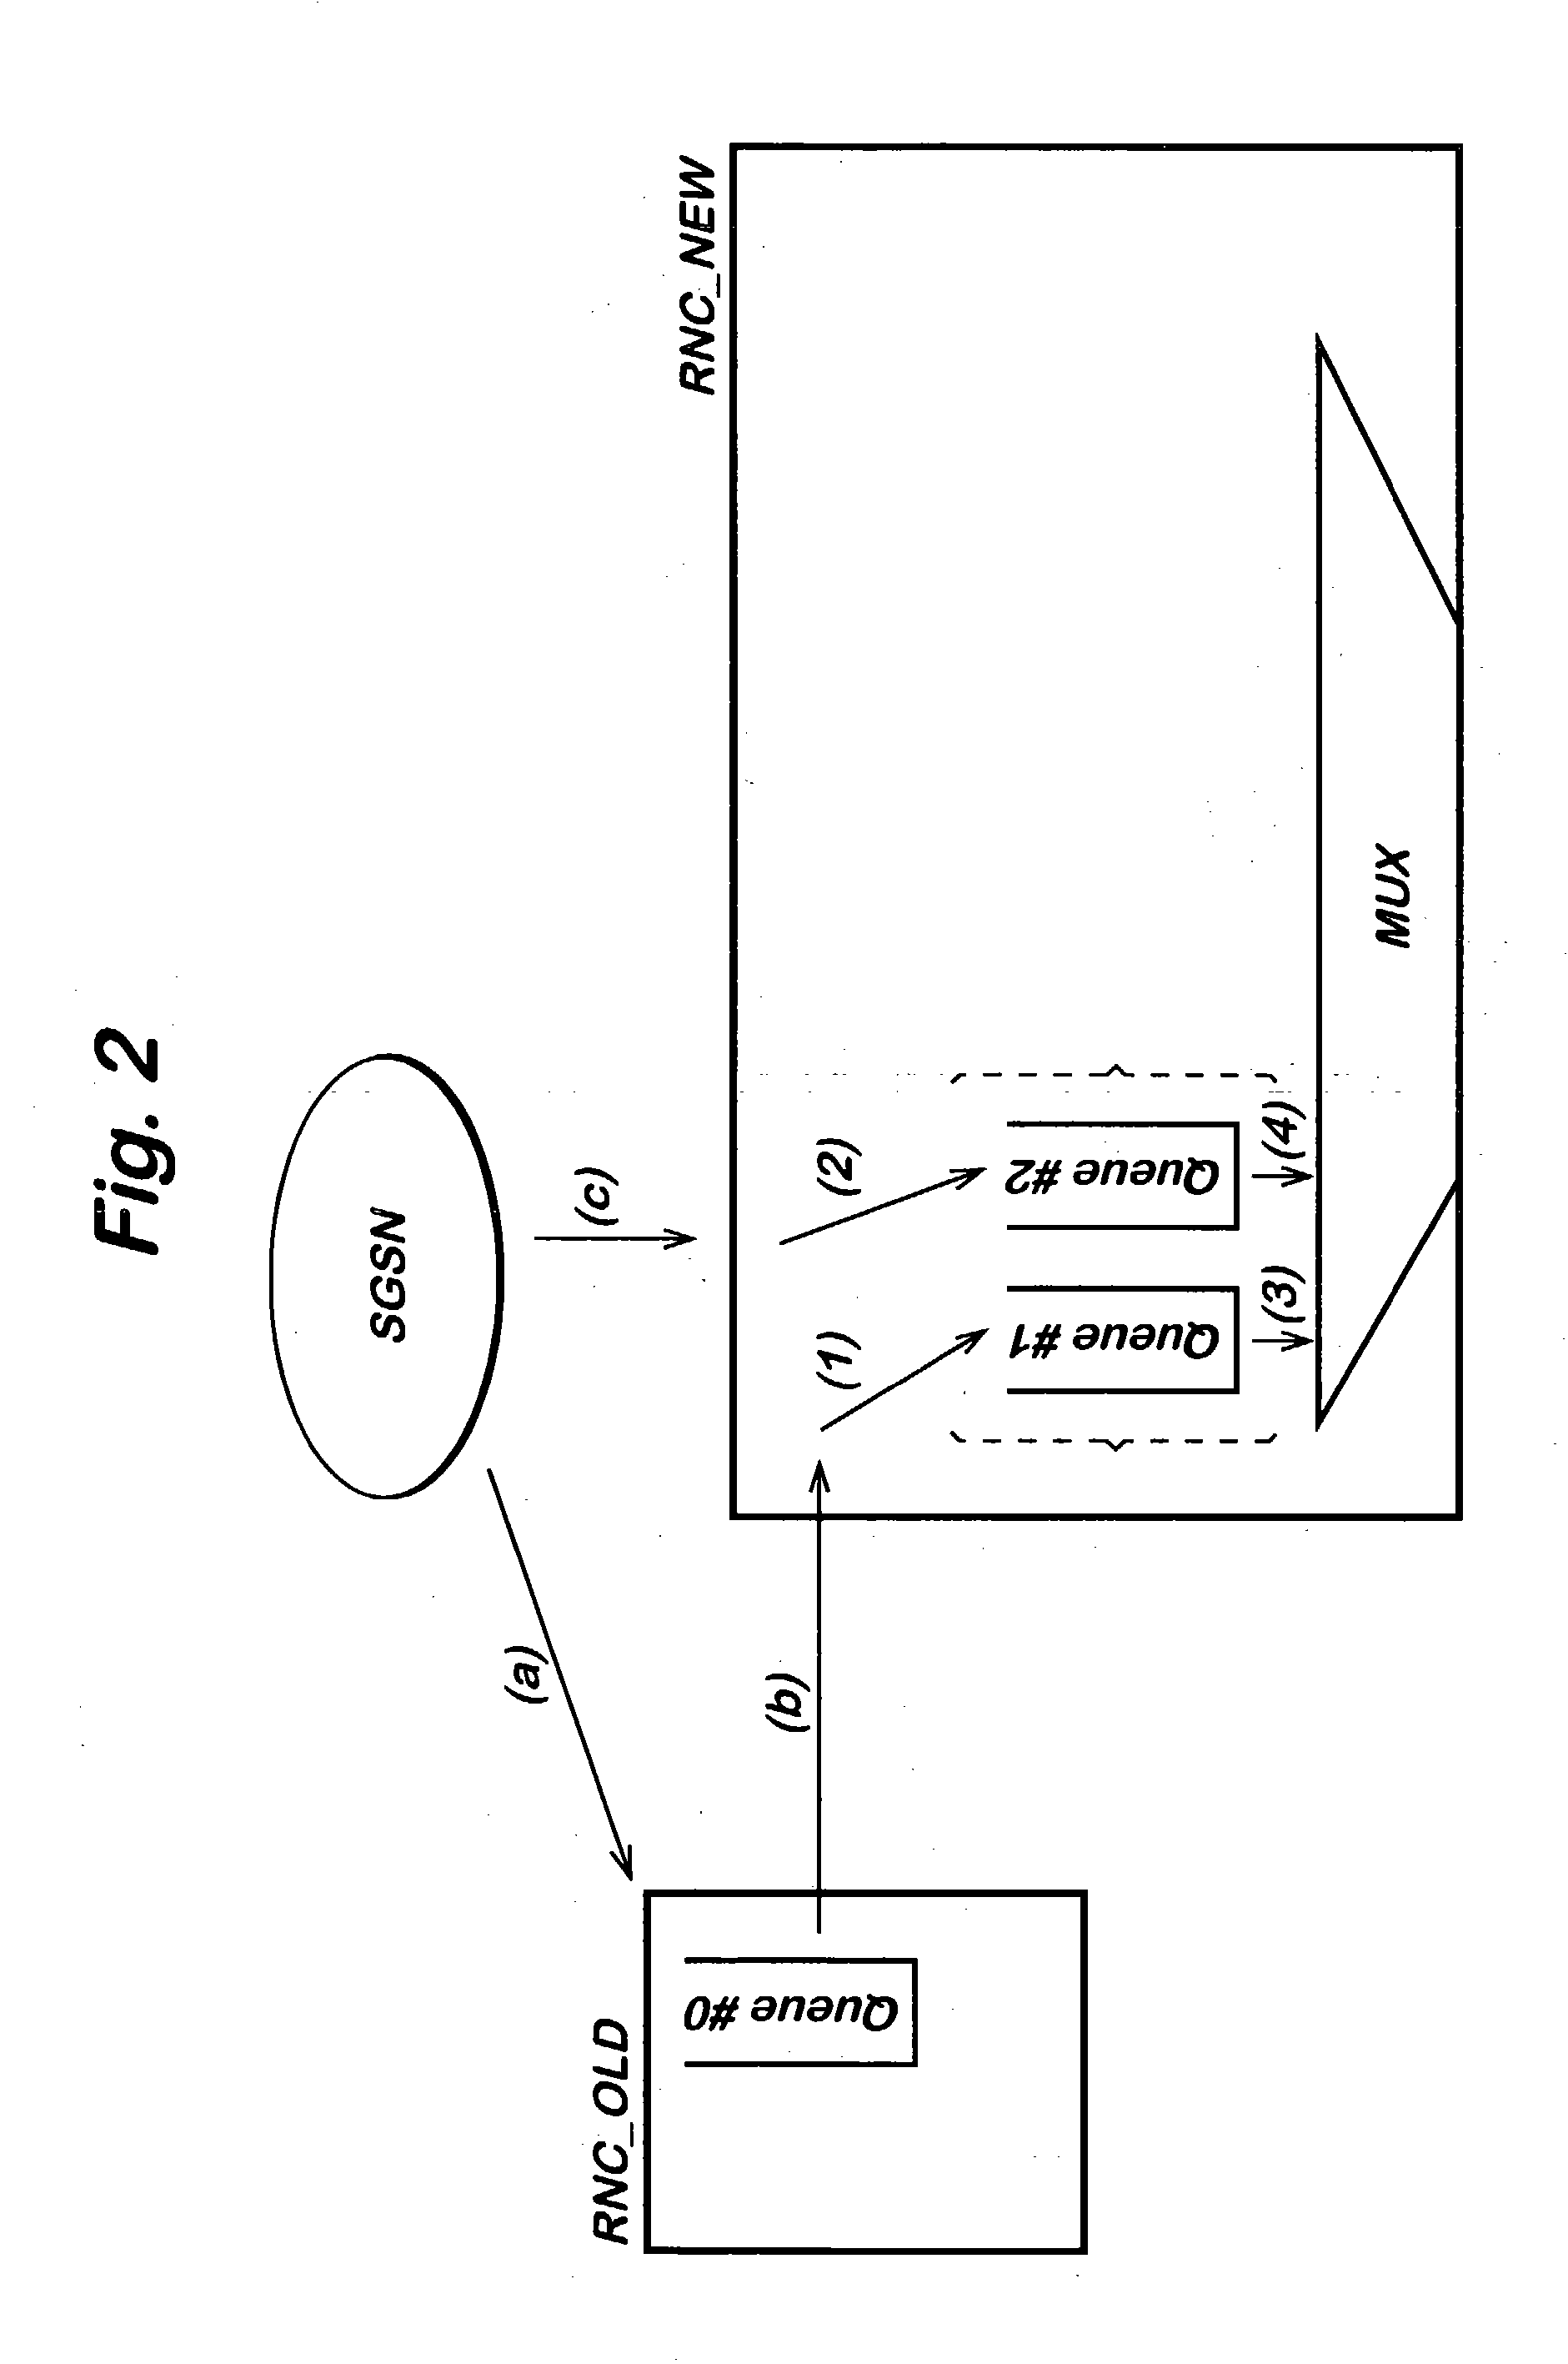 Packet ordering method and apparatus in a mobile communication network employing hierarchical routing with data packet forwarding